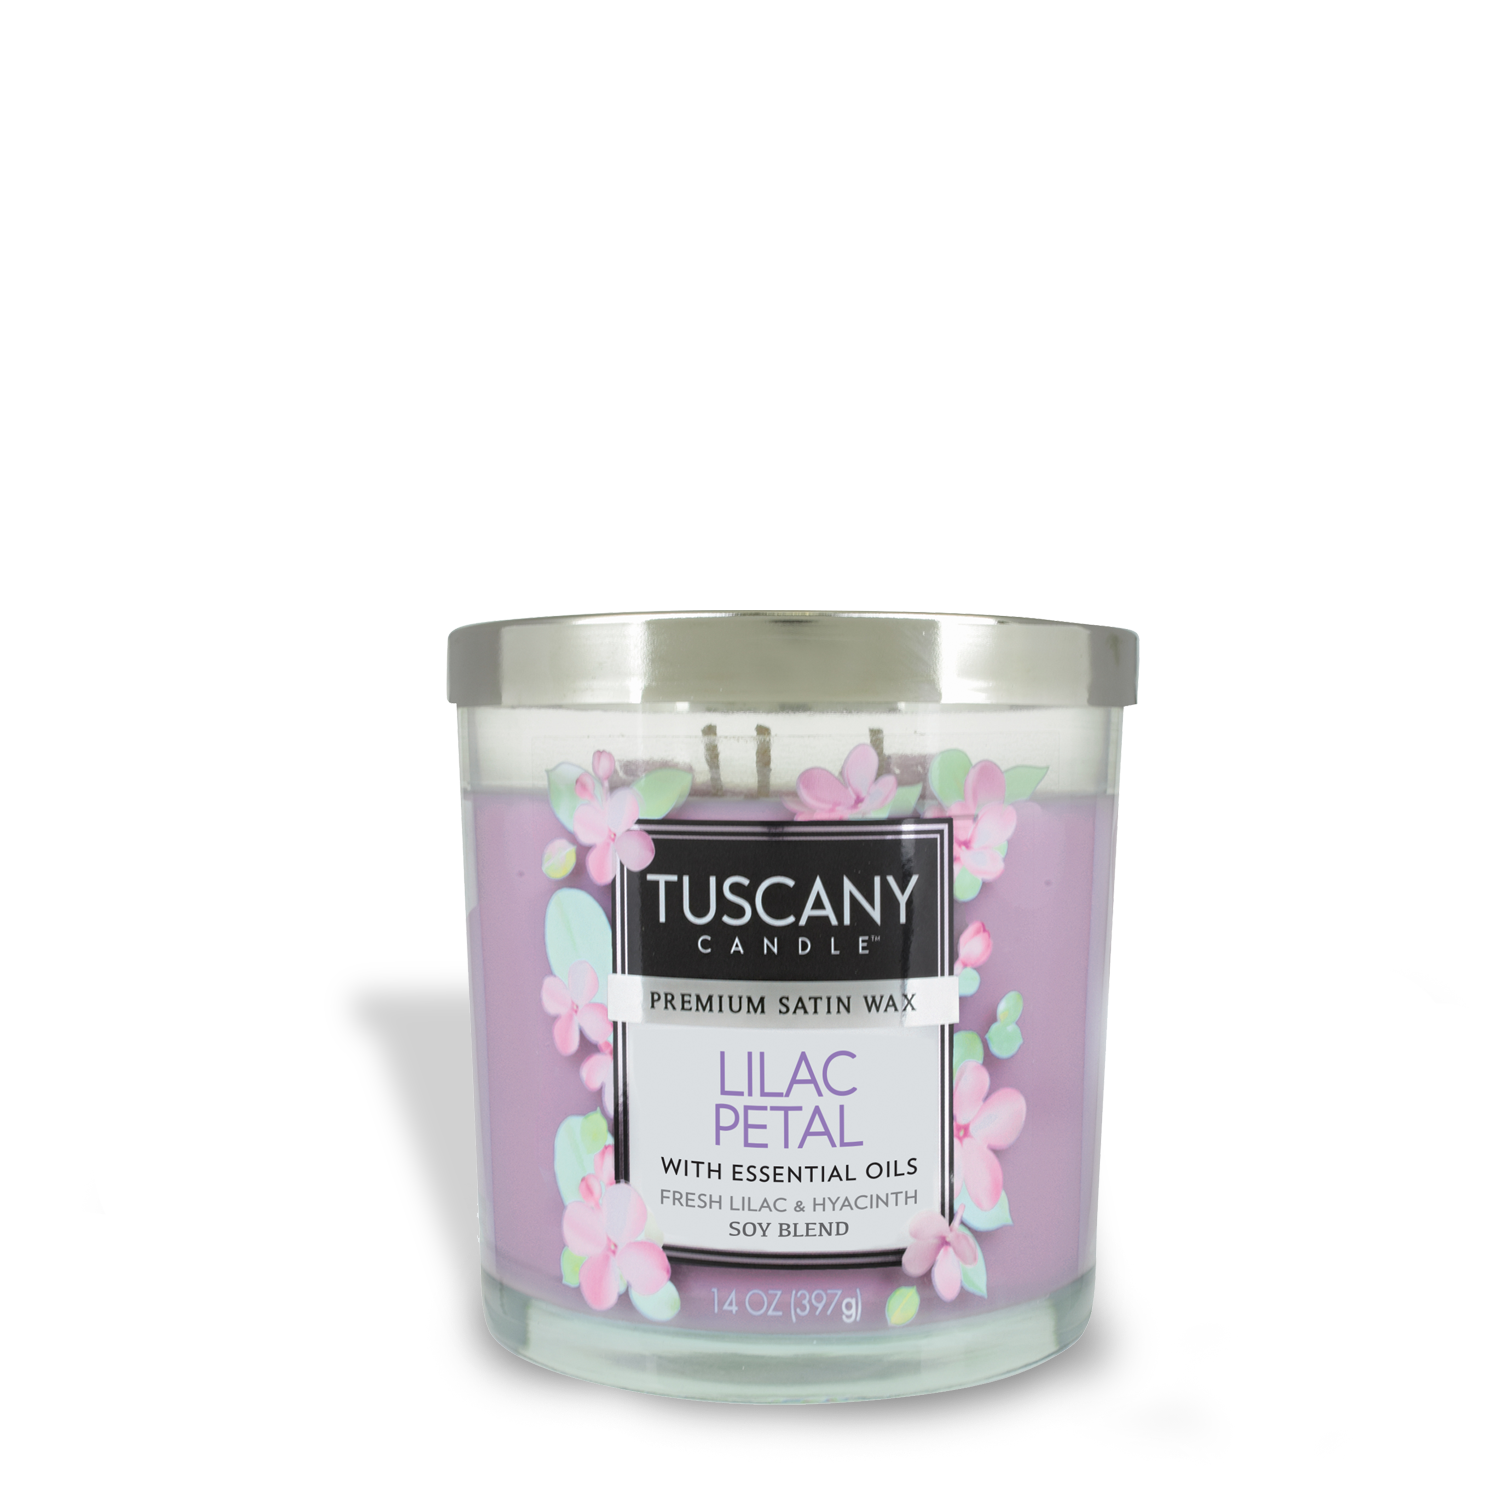 A Lilac Petal Long-Lasting Scented Jar Candle (14 oz) by Tuscany Candle with lavender flowers and lilac on it.